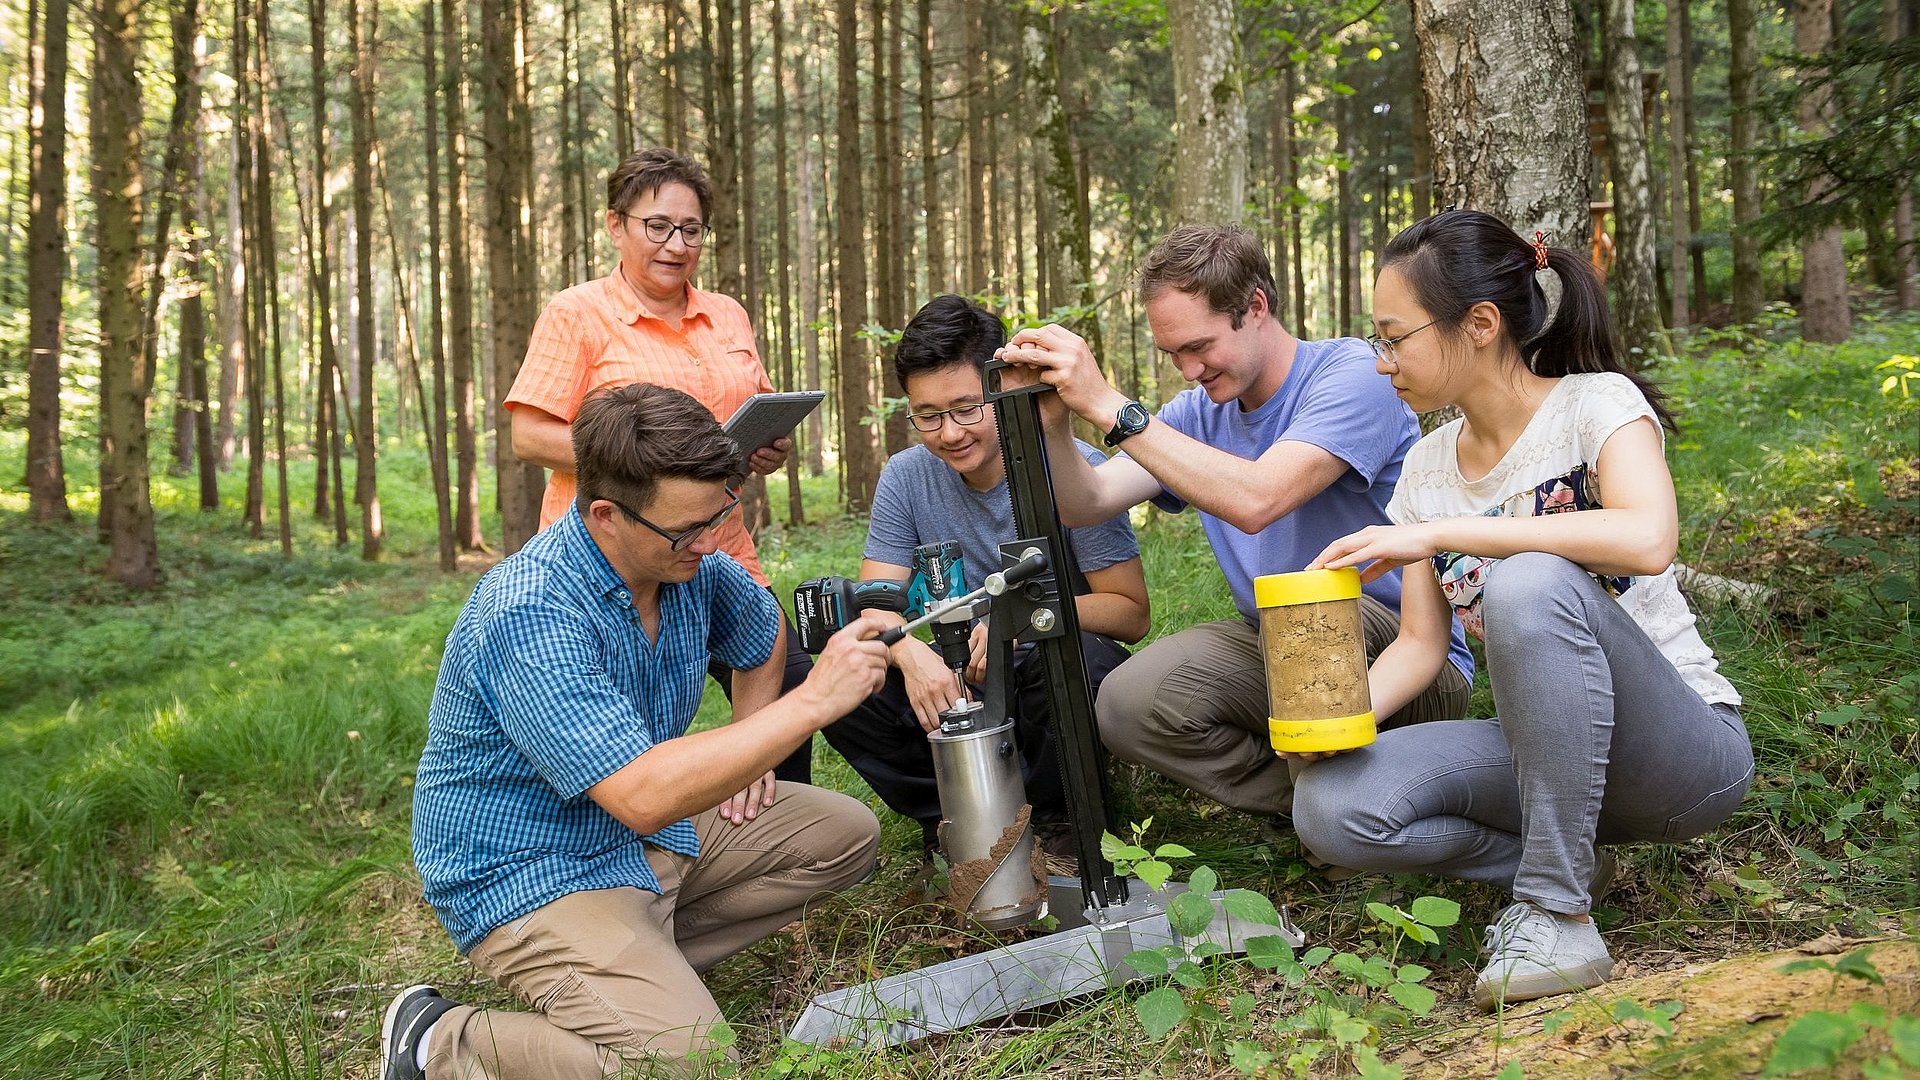 A professor (left) takes soil samples with her students and doctoral students in agricultural sciences in the Freising forest area, 2019.